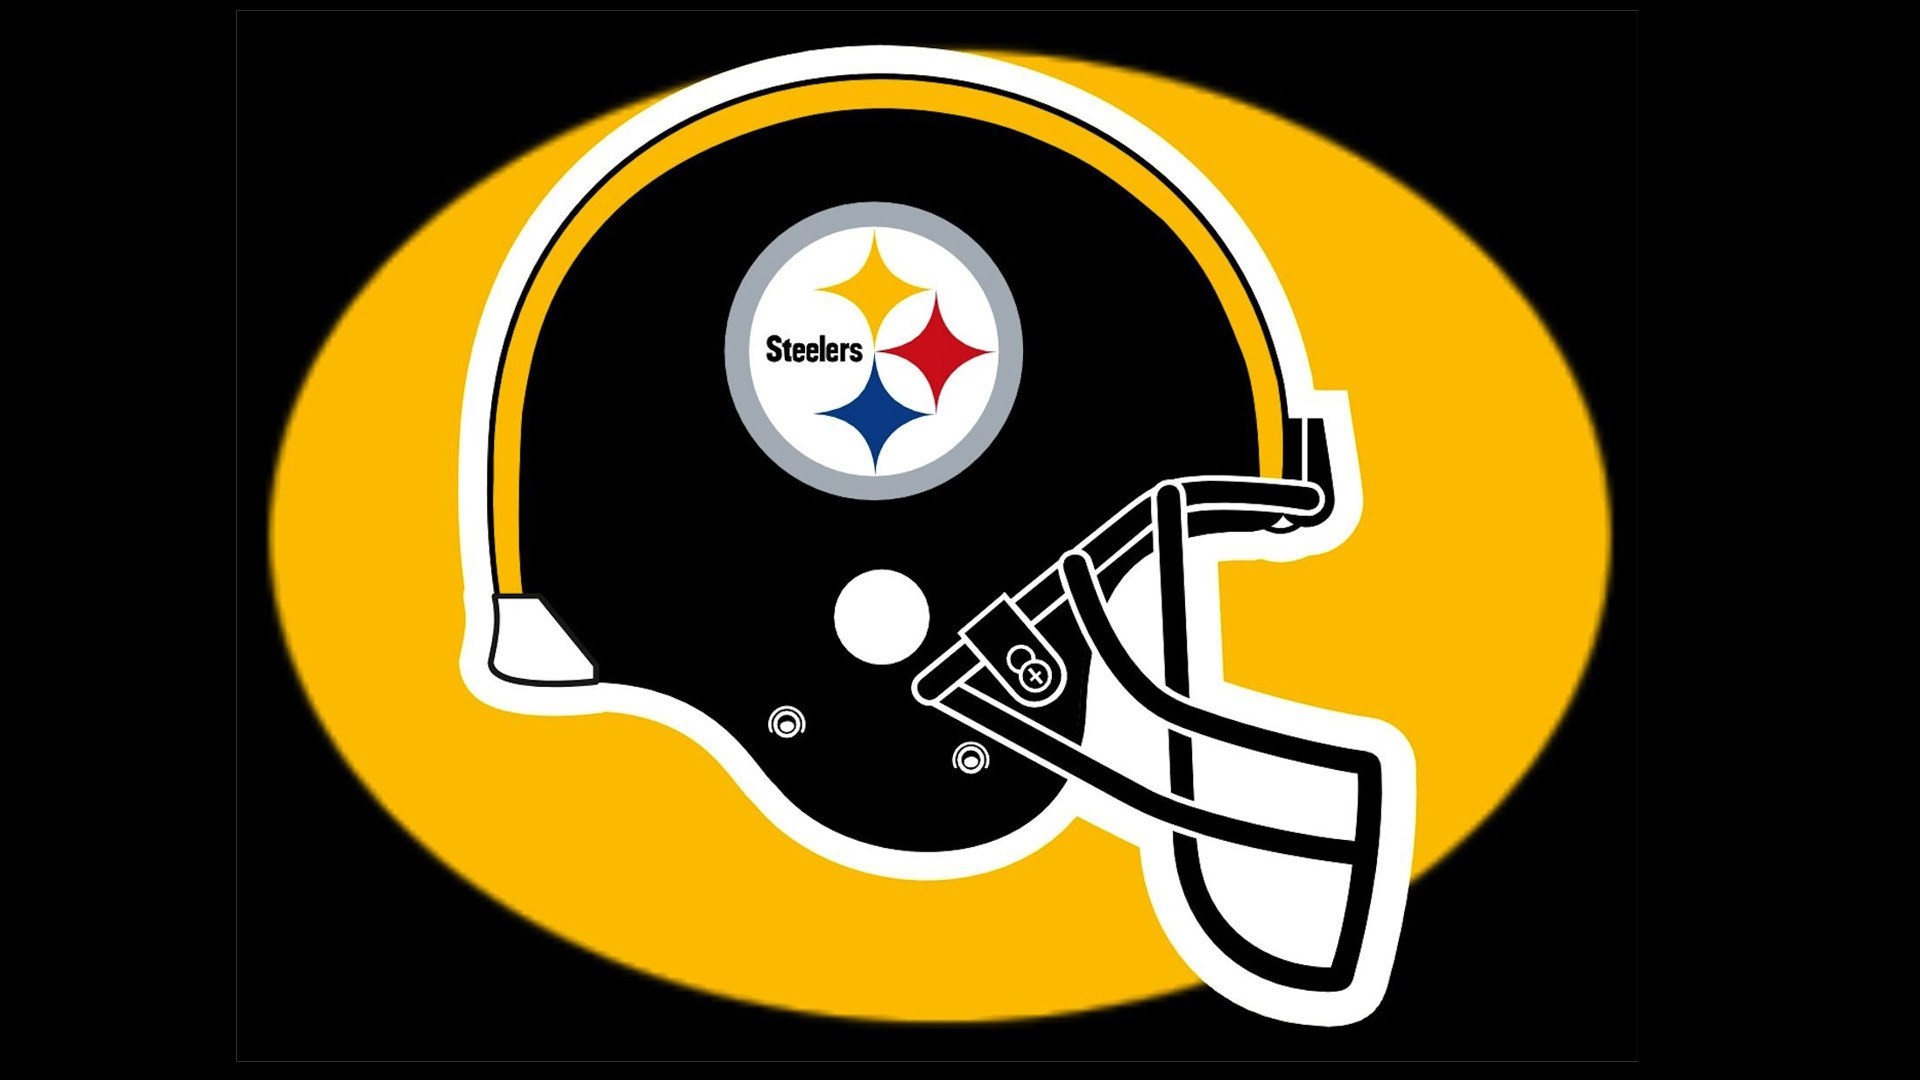 pittsburgh steelers wallpapers 1080p high quality by Hallstein Peacock  (2016-09-13)